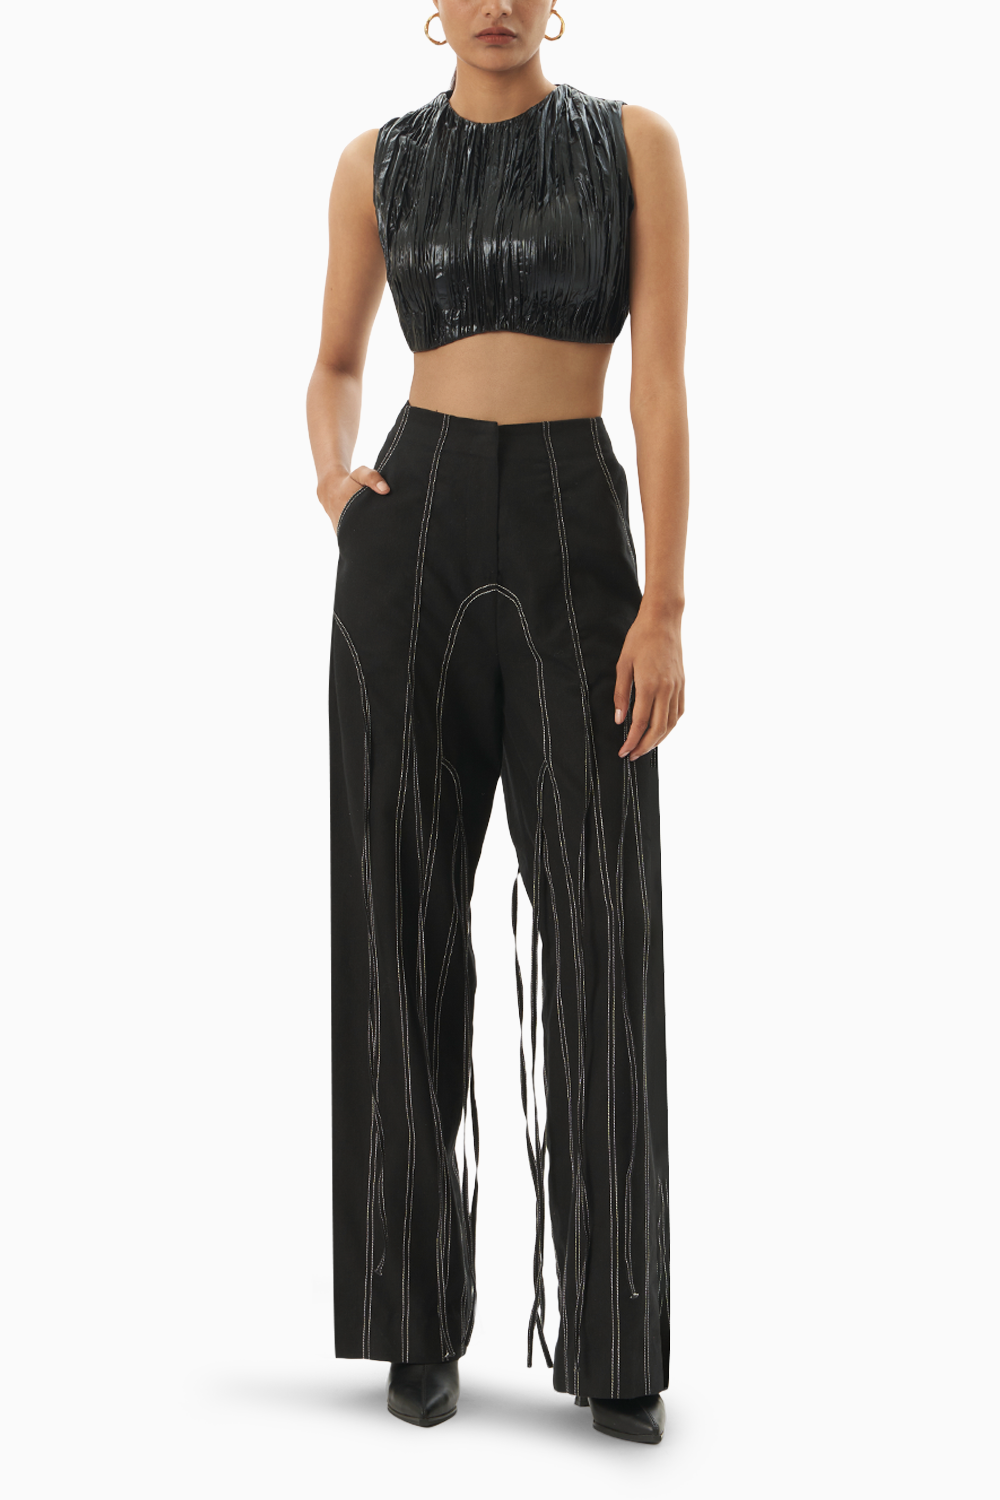 Black Ruched Foil Top and Denim Panelled Trouser